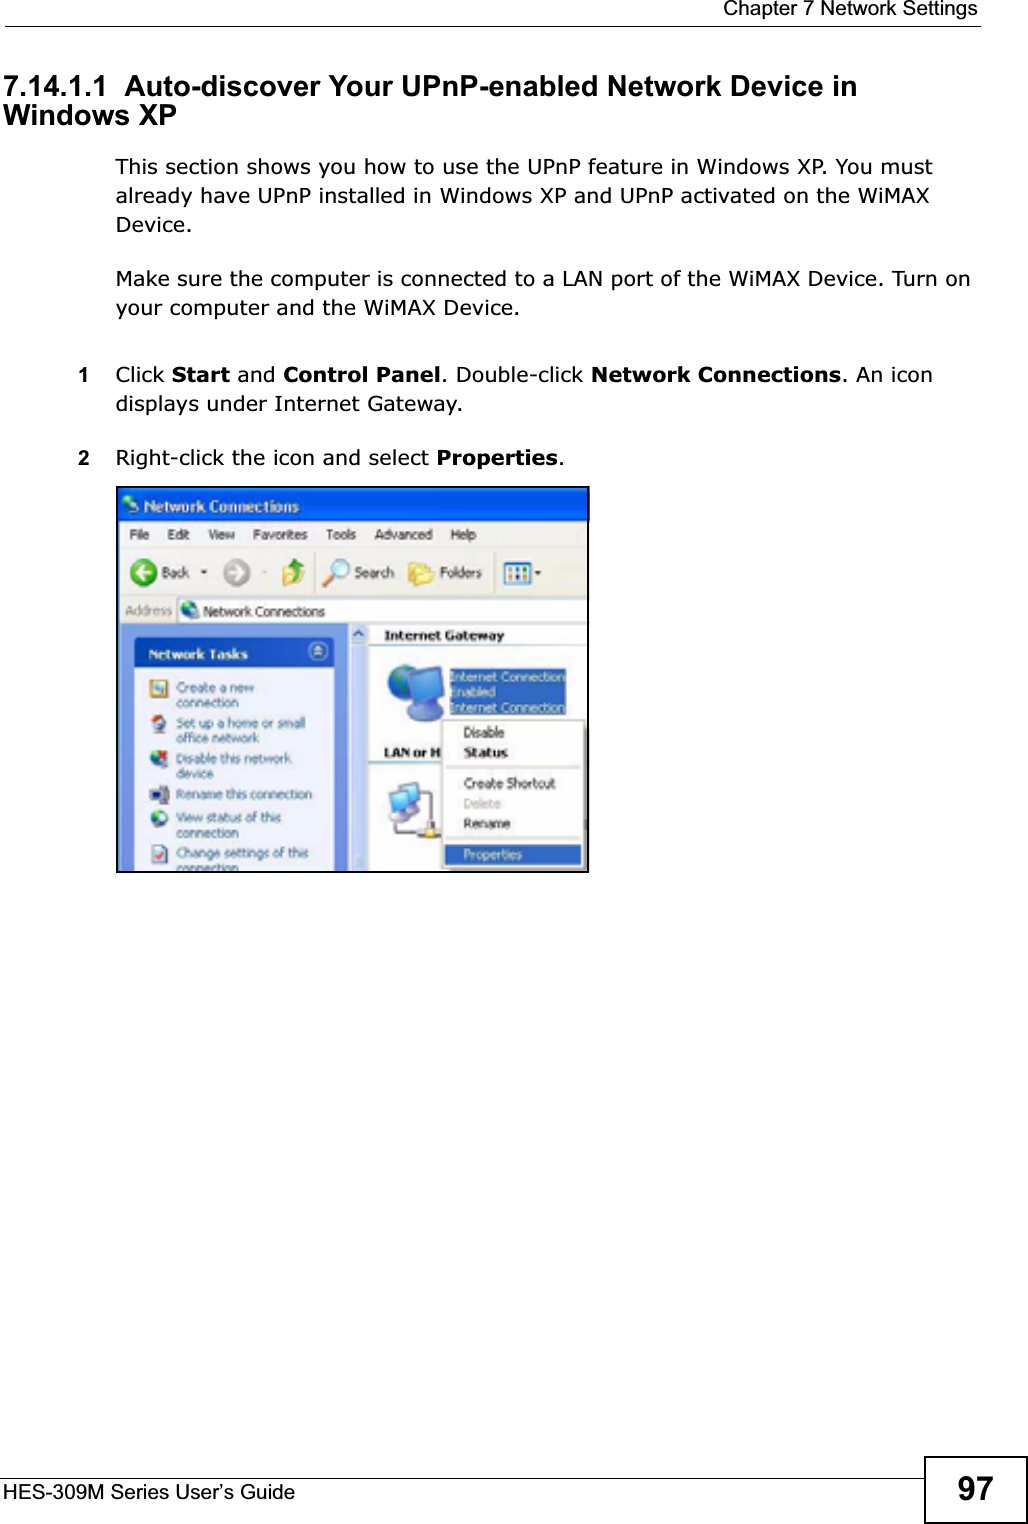  Chapter 7 Network SettingsHES-309M Series User’s Guide 977.14.1.1  Auto-discover Your UPnP-enabled Network Device in Windows XPThis section shows you how to use the UPnP feature in Windows XP. You must already have UPnP installed in Windows XP and UPnP activated on the WiMAX Device.Make sure the computer is connected to a LAN port of the WiMAX Device. Turn on your computer and the WiMAX Device. 1Click Start and Control Panel. Double-click Network Connections. An icon displays under Internet Gateway.2Right-click the icon and select Properties.